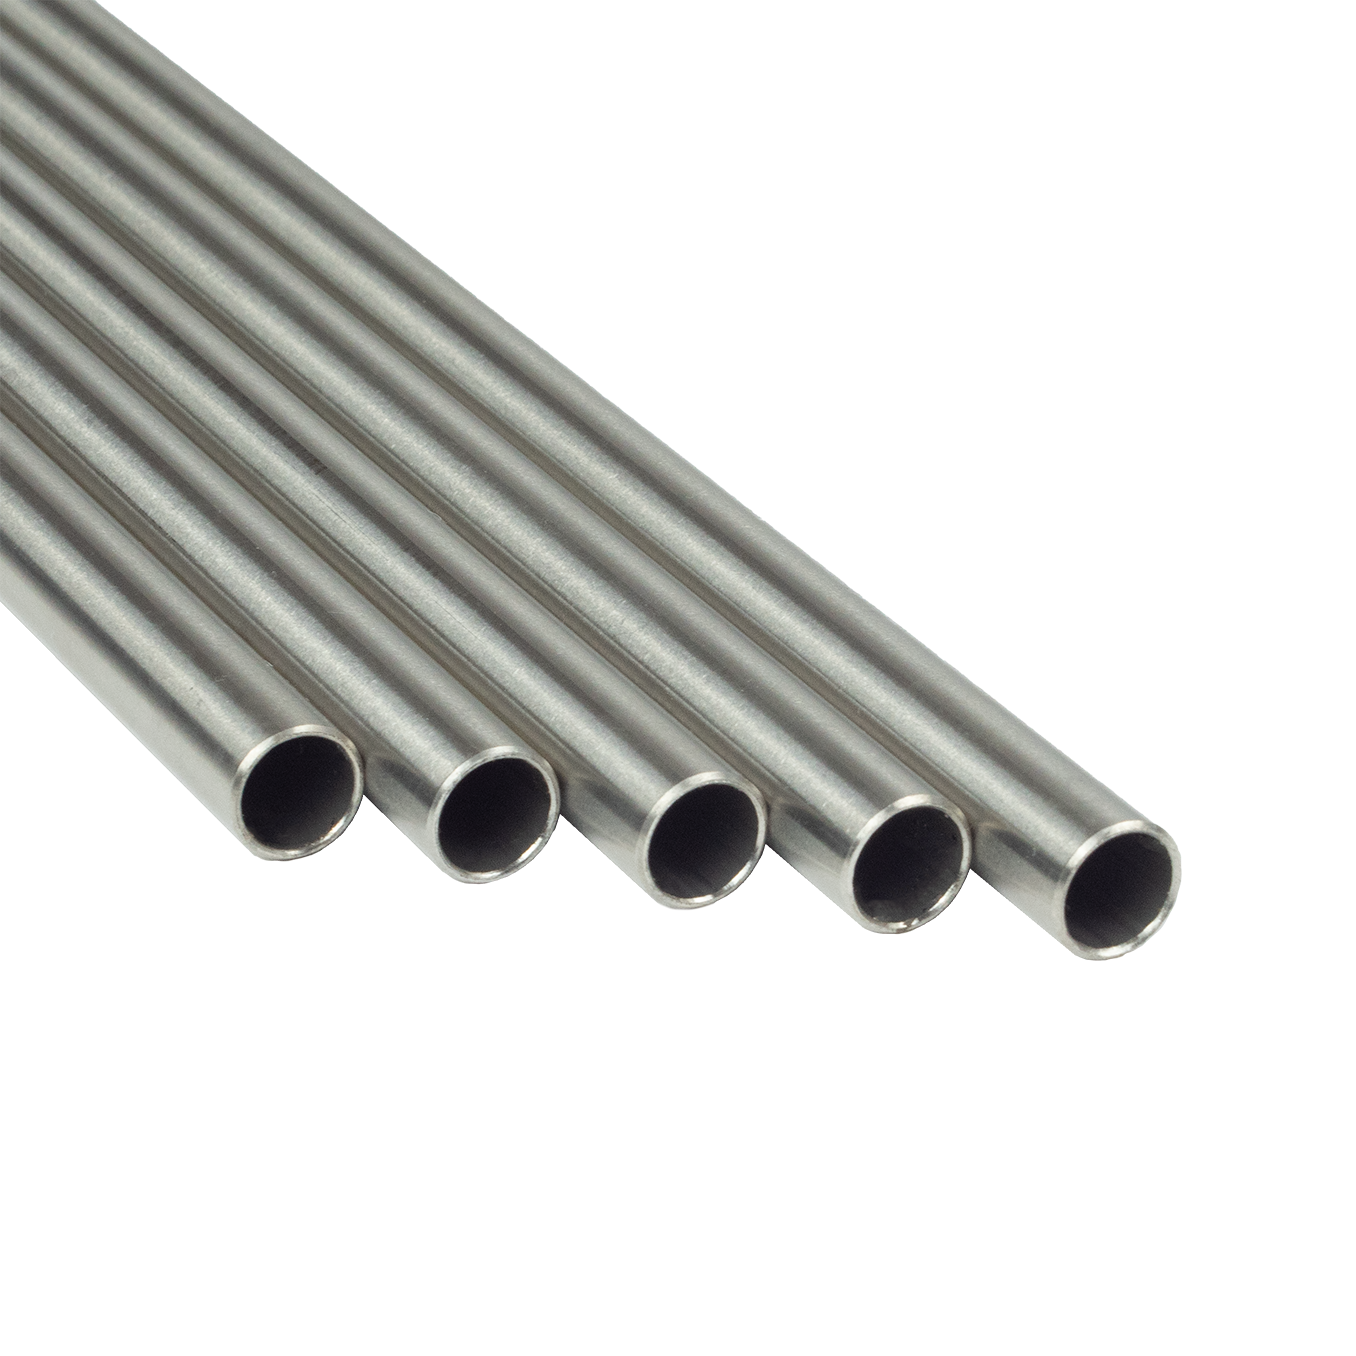 SFS Stand Tube - Ø 10 x 1 mm, length 450 mm - stainless steel